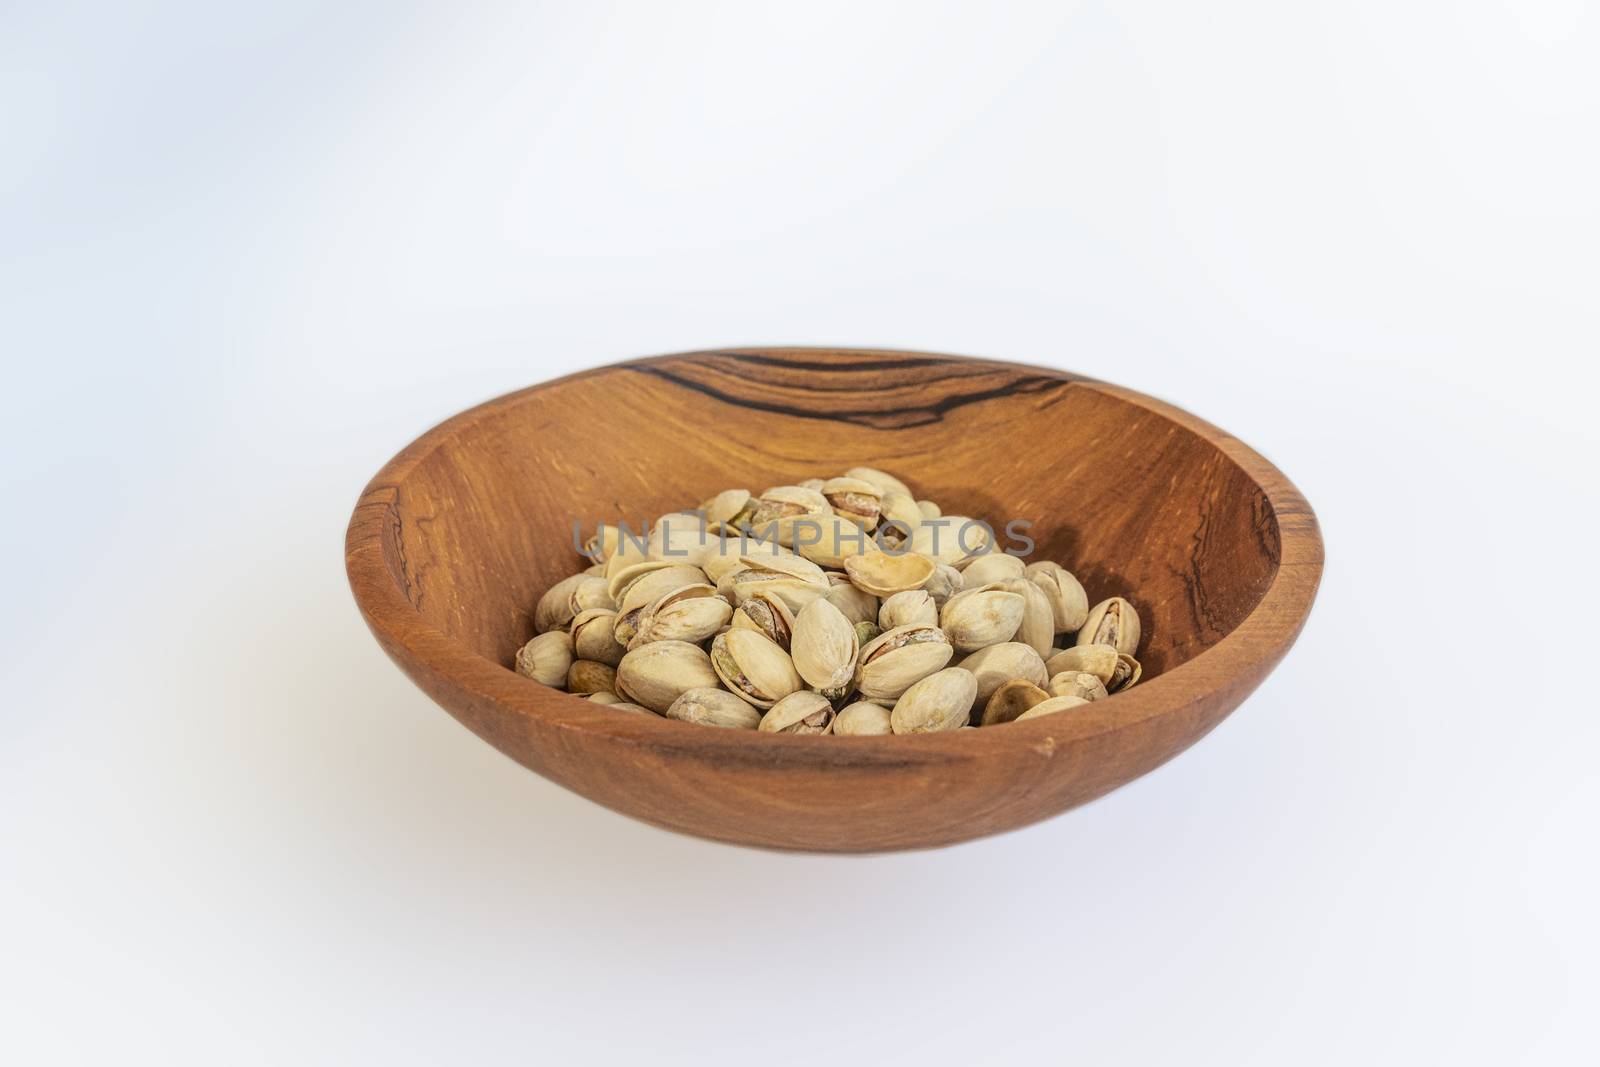 Pistachios in wooden bol as appertiser with drinks against a white background